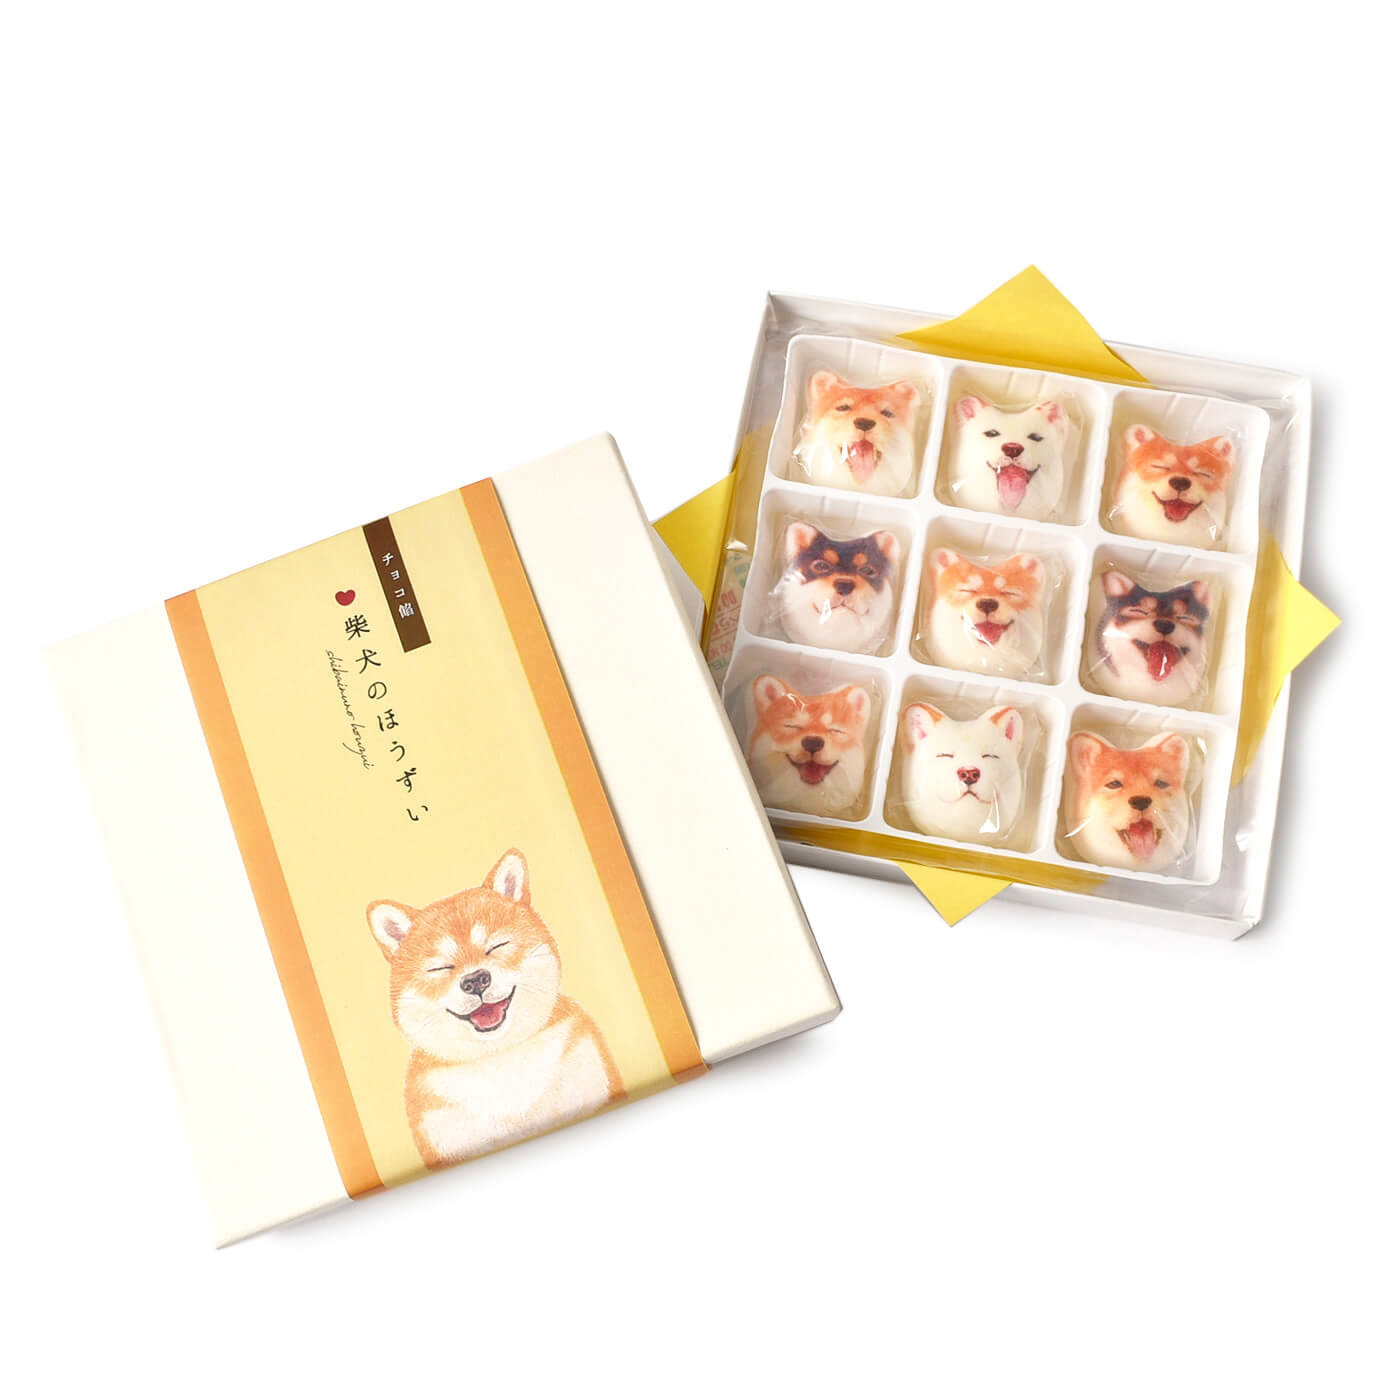 You Can Now Buy This Shiba Inu 9-Piece Marshmallow Set Online, And Lots of Other Kawaii Things! - WORLD OF BUZZ 3